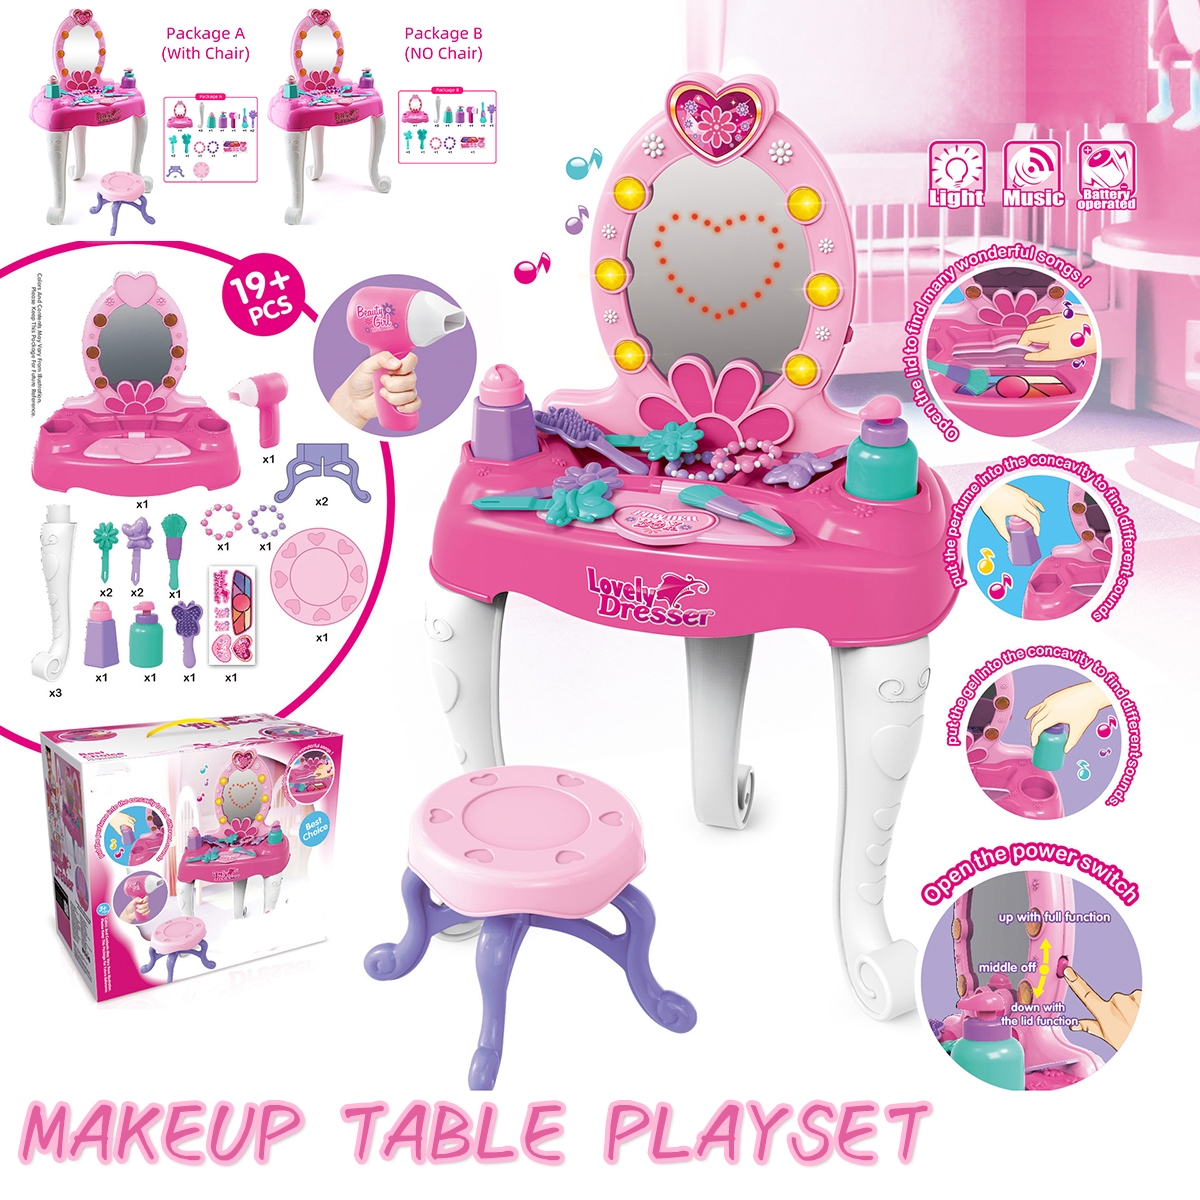 19+ Pcs Simulation Lovely Dresser Kids Makeup Table Play Set Toy with LED Light Music Effect for Kids Girl Gift